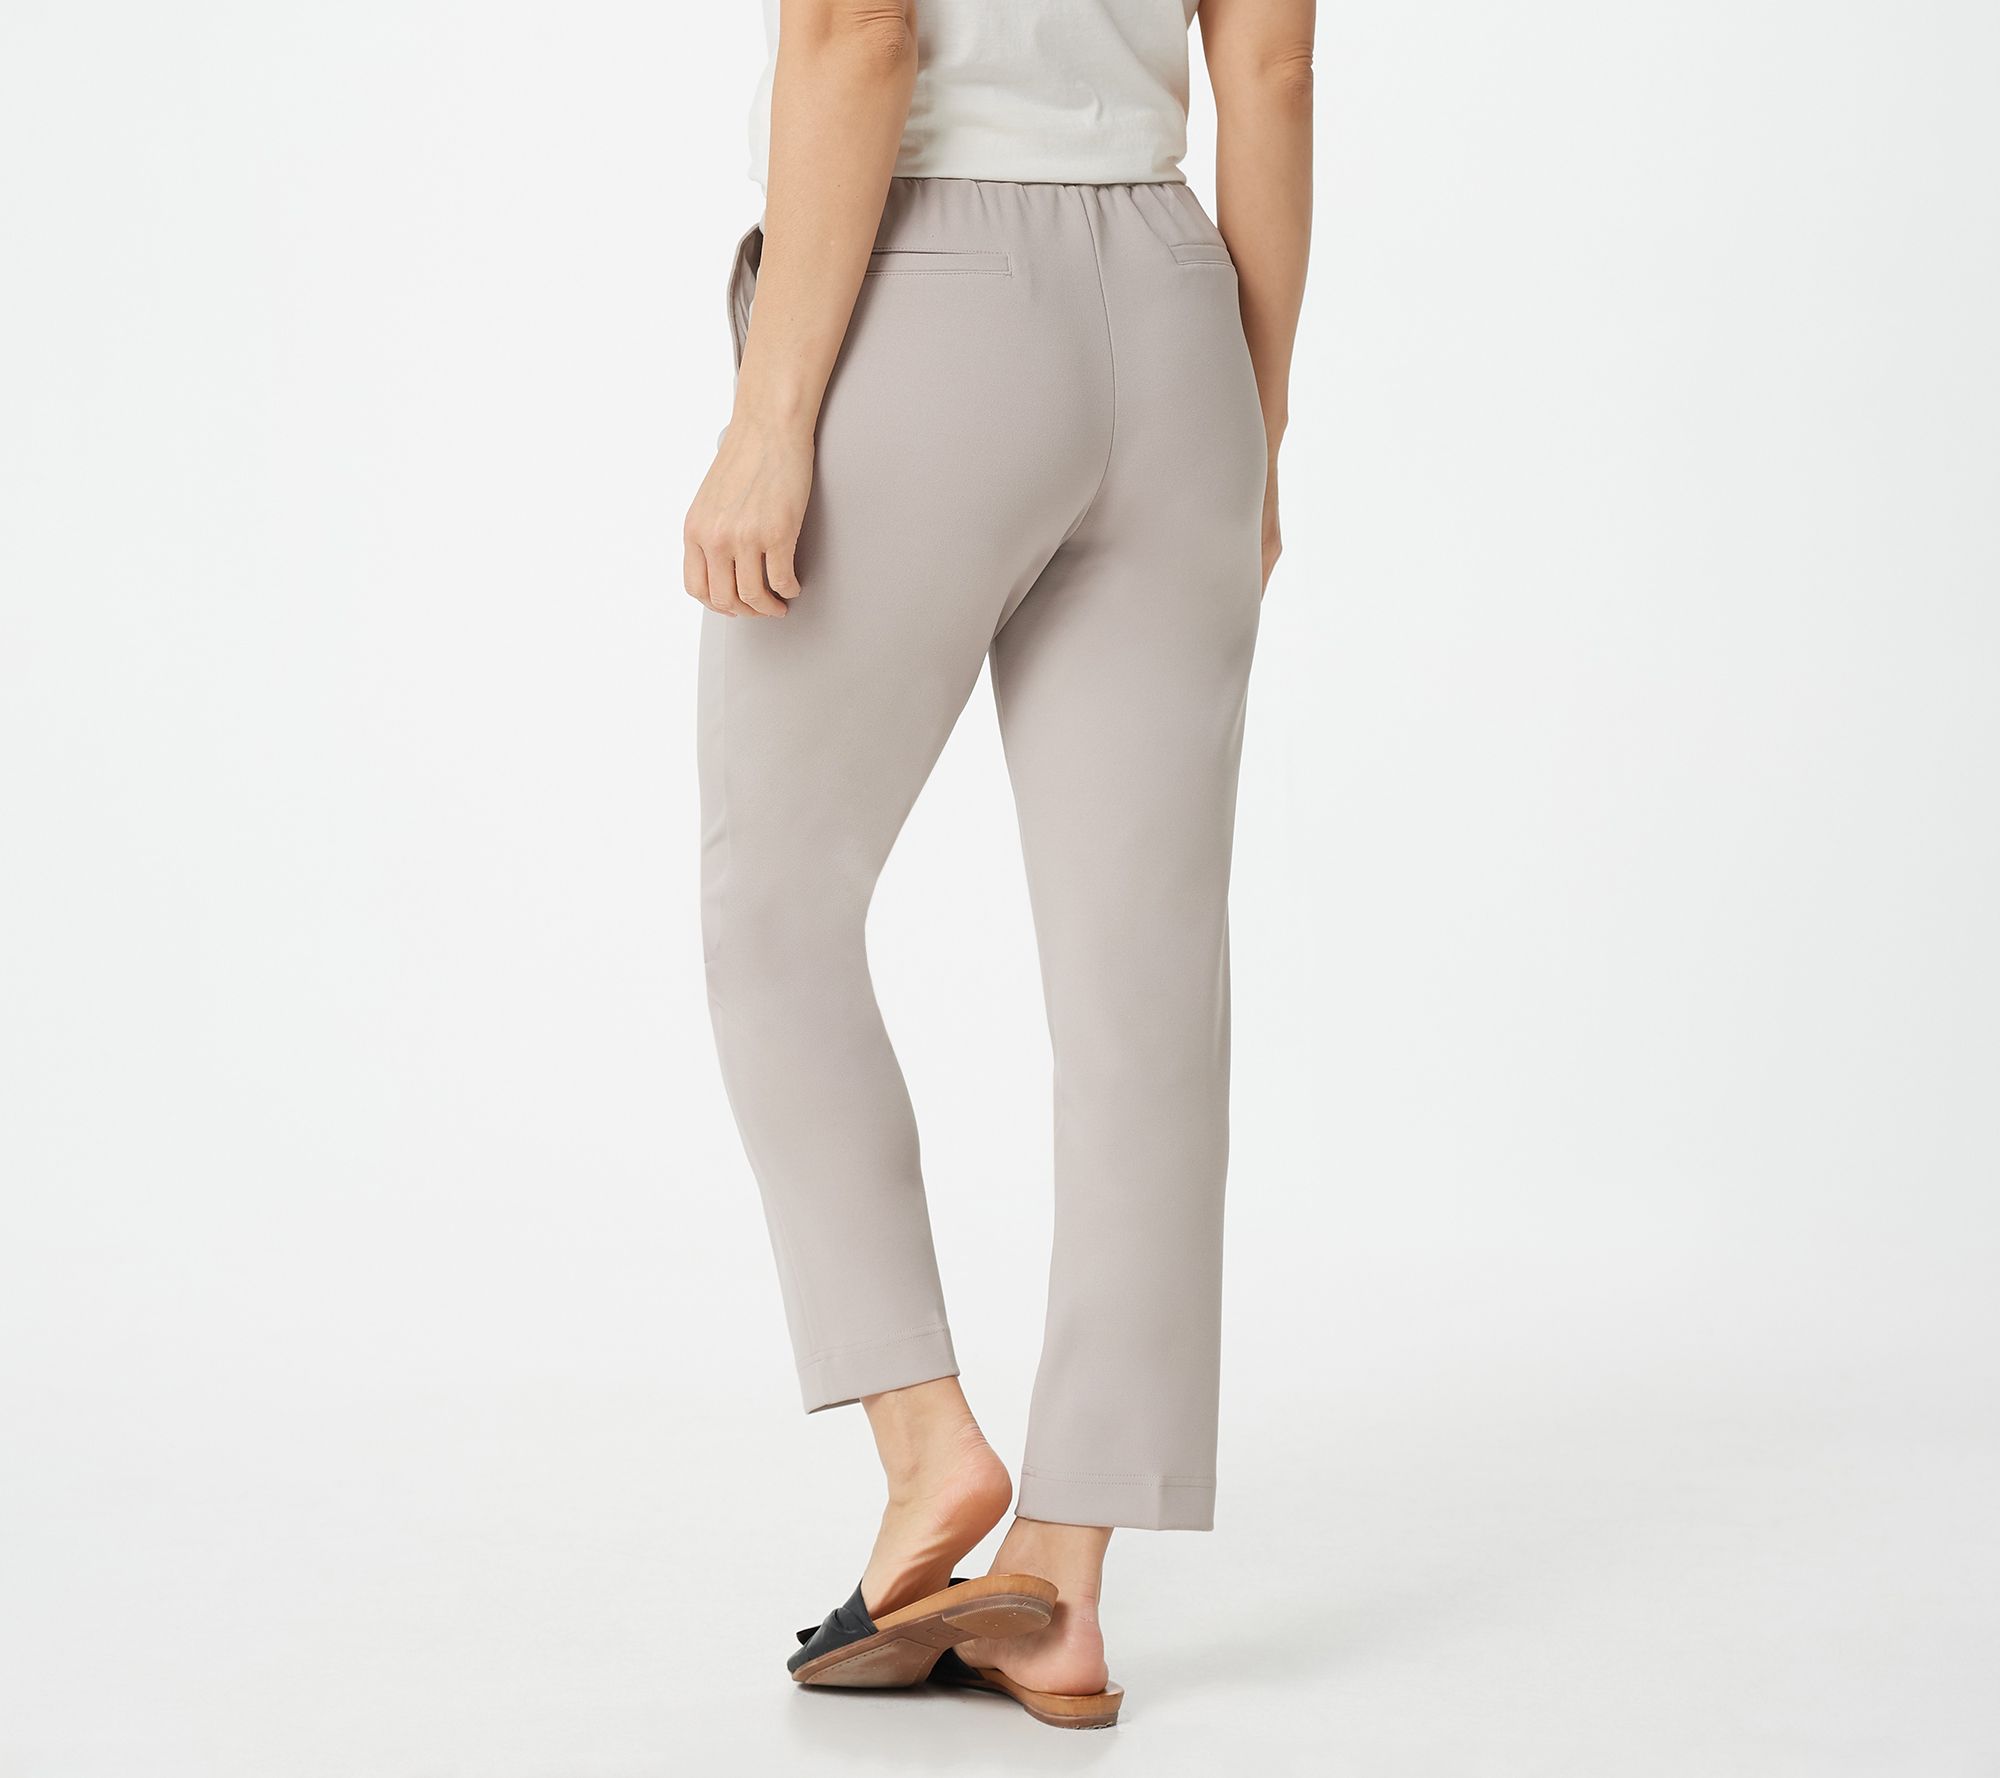 Haute Hppie Tribe Regular Pull-On Knit Ankle Pant - QVC.com